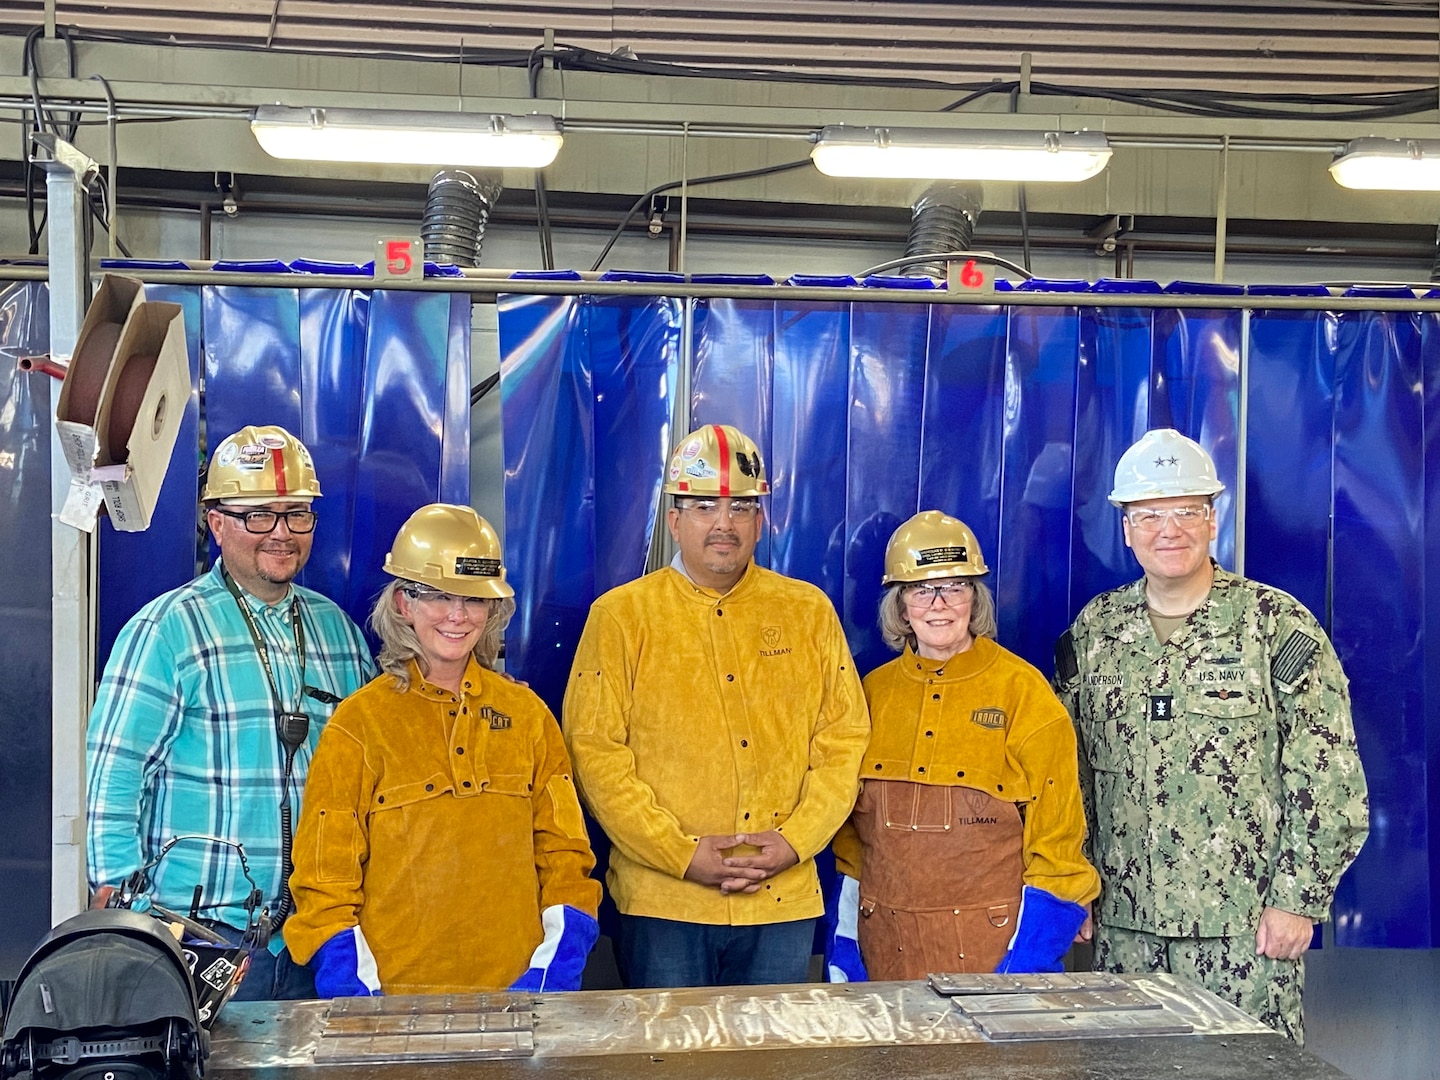 The keel for the future USNS Lucy Stone (T-AO 209), the Navy’s 5th John Lewis-class fleet replenishment oiler, was laid at General Dynamics National Steel and Shipbuilding Company’s (GD NASSCO) shipyard in San Diego, August 8.